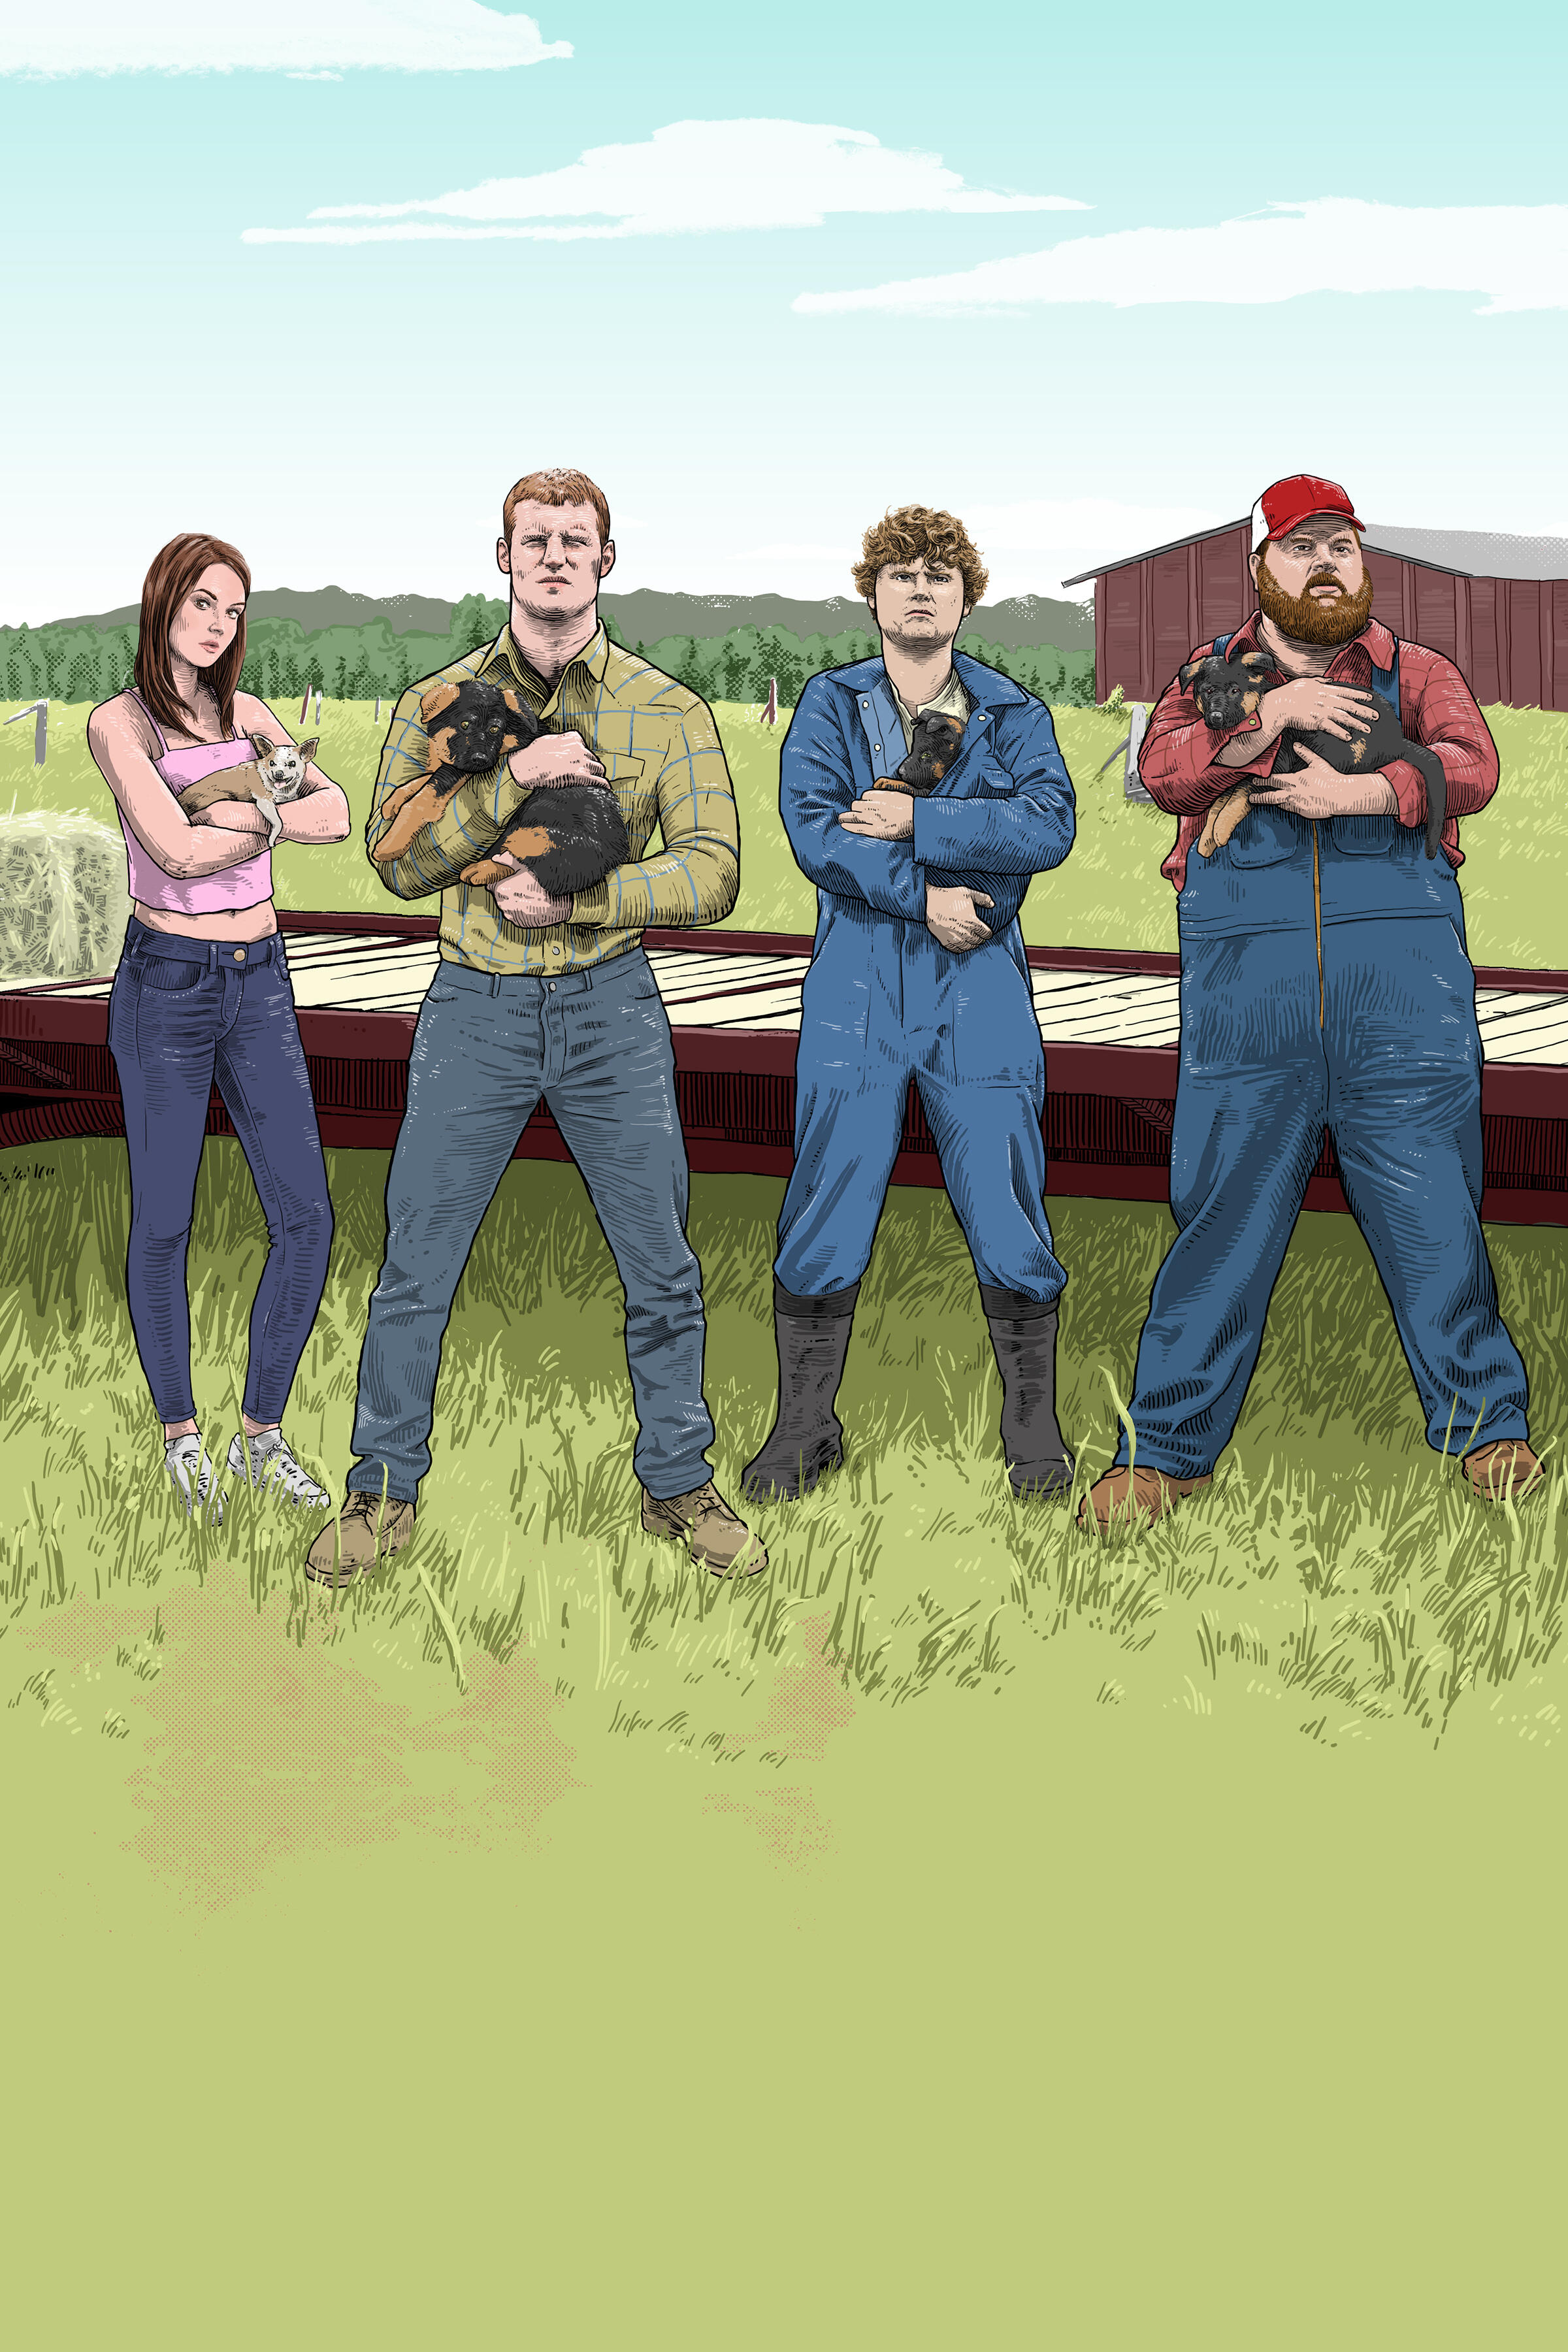 Letterkenny -- Season 11 -- The residents of Letterkenny belong to one of three groups: the Hicks, the Skids, and the Hockey Players, who are constantly feuding with each other over seemingly trivial matters that often end with someone getting their ass kicked. In season 11, the Hockey Players have unwanted guests at their beer league game, the Hicks determine the best flavor of chip, the Skids work to improve their business, influencers descend on Letterkenny…and that’s just for starters, buddy. (Courtesy of Hulu)